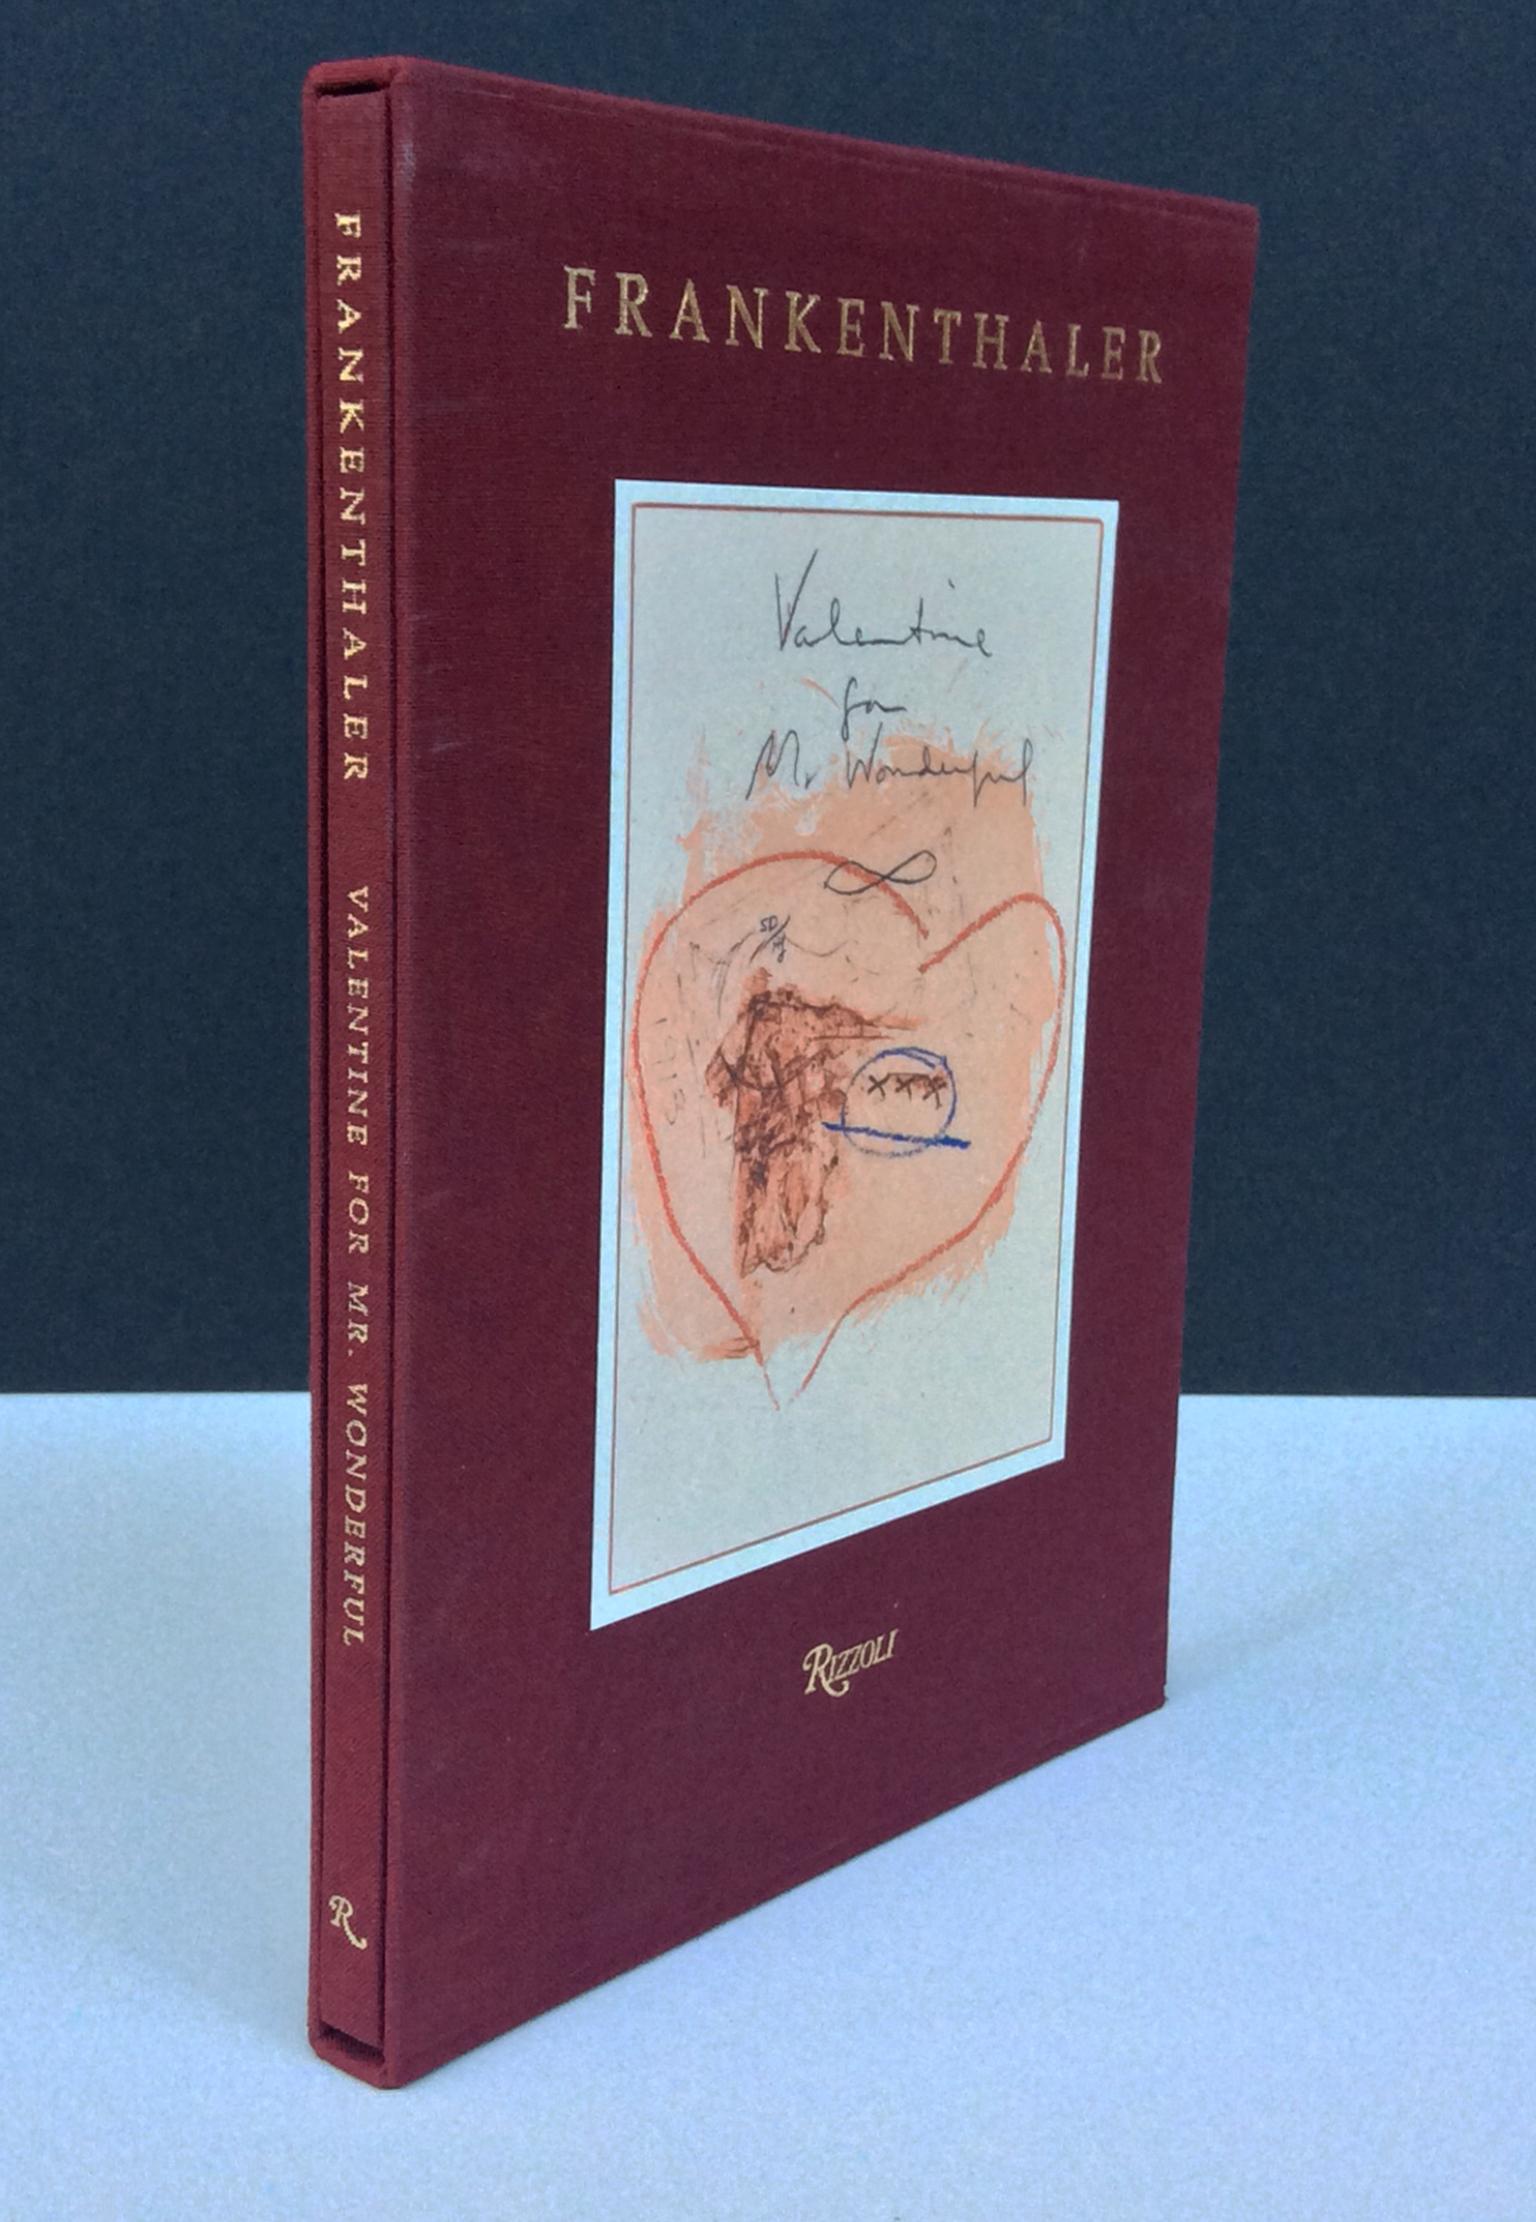 A colorful book of intaglio prints by the American abstract-Expressionist Helen Frankenthaler (1928-2011). Published by Rizzoli in 1996, 1st edition, hardcover. This book is signed on the title page by Frankenthaler, with a handwritten note to a